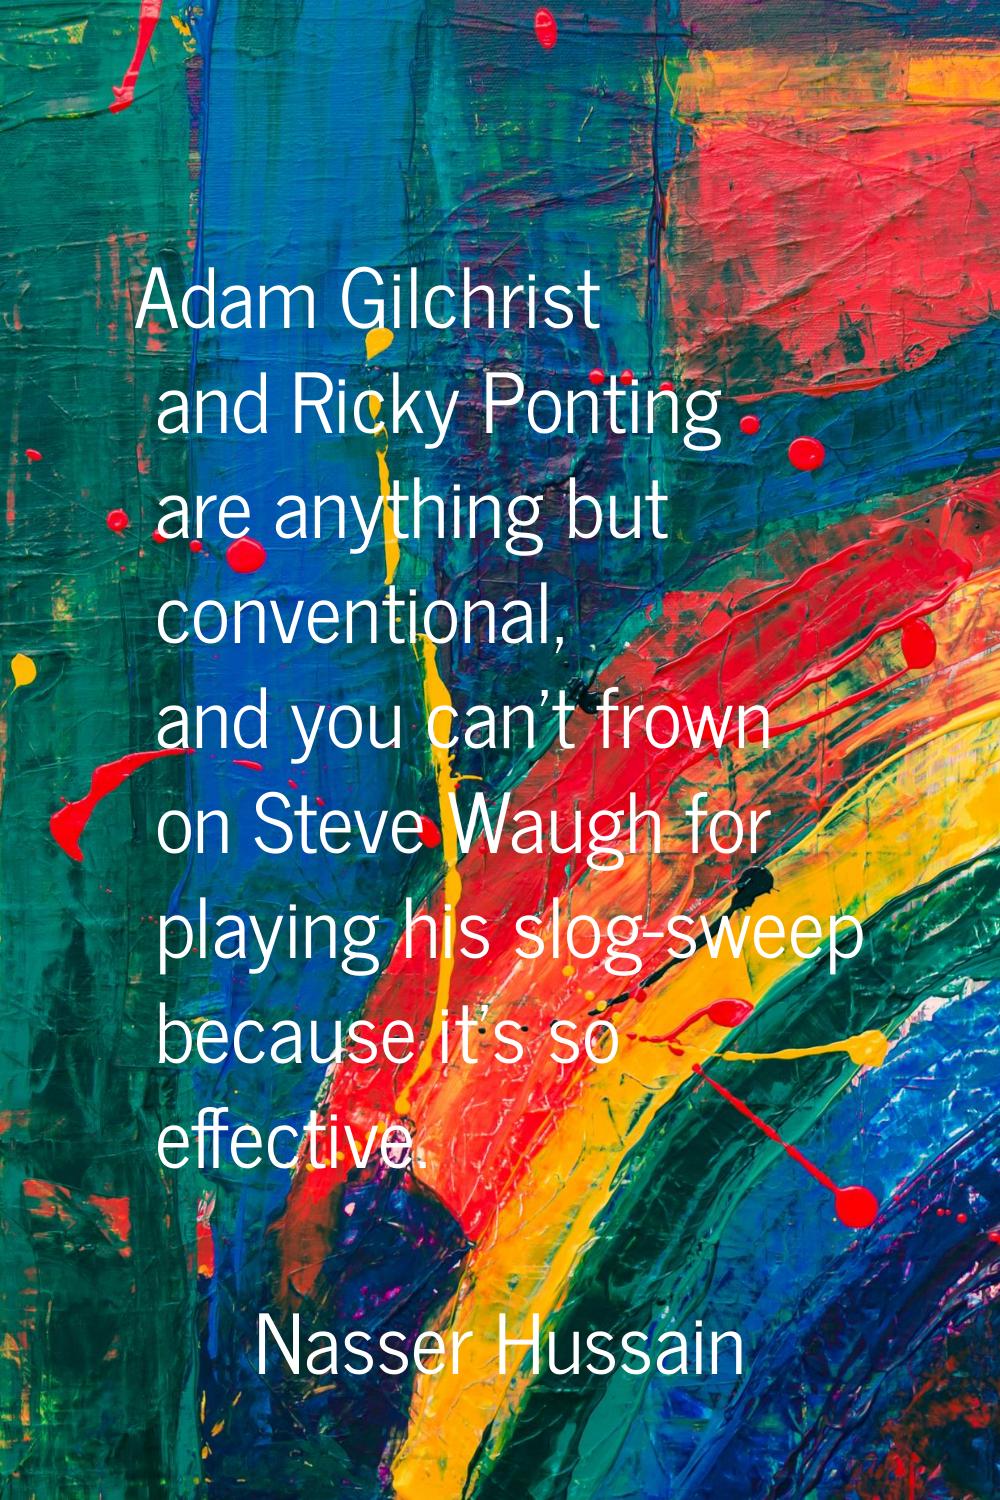 Adam Gilchrist and Ricky Ponting are anything but conventional, and you can't frown on Steve Waugh 